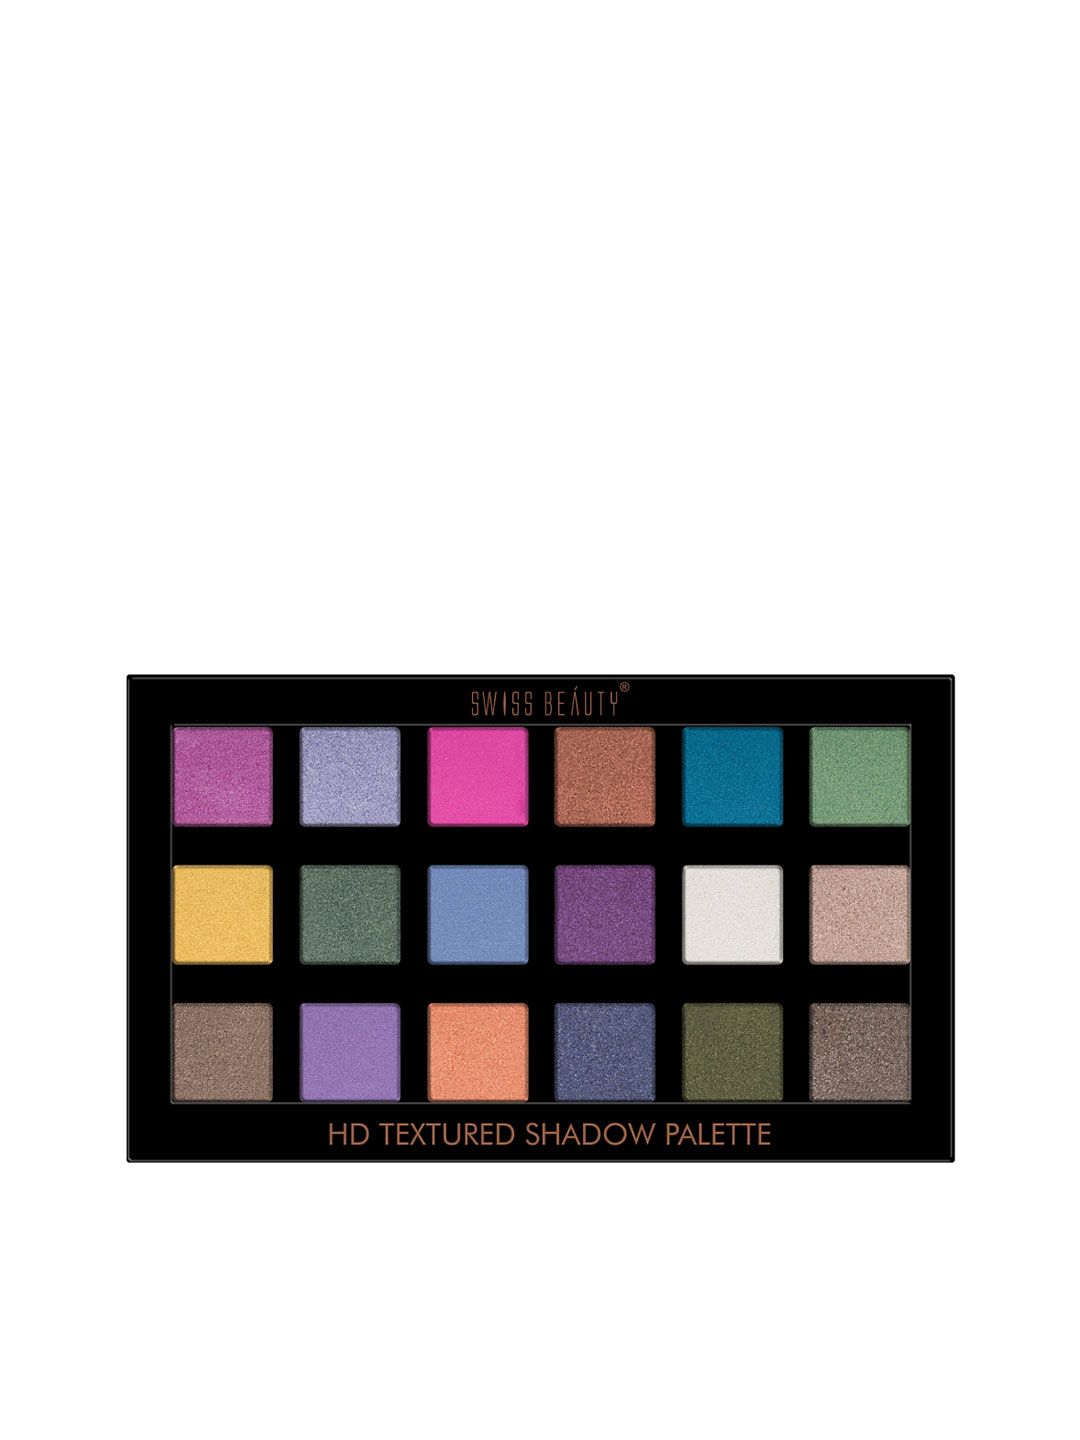 SWISS BEAUTY HD Textured Shadow Palette - Shade 2 Price in India